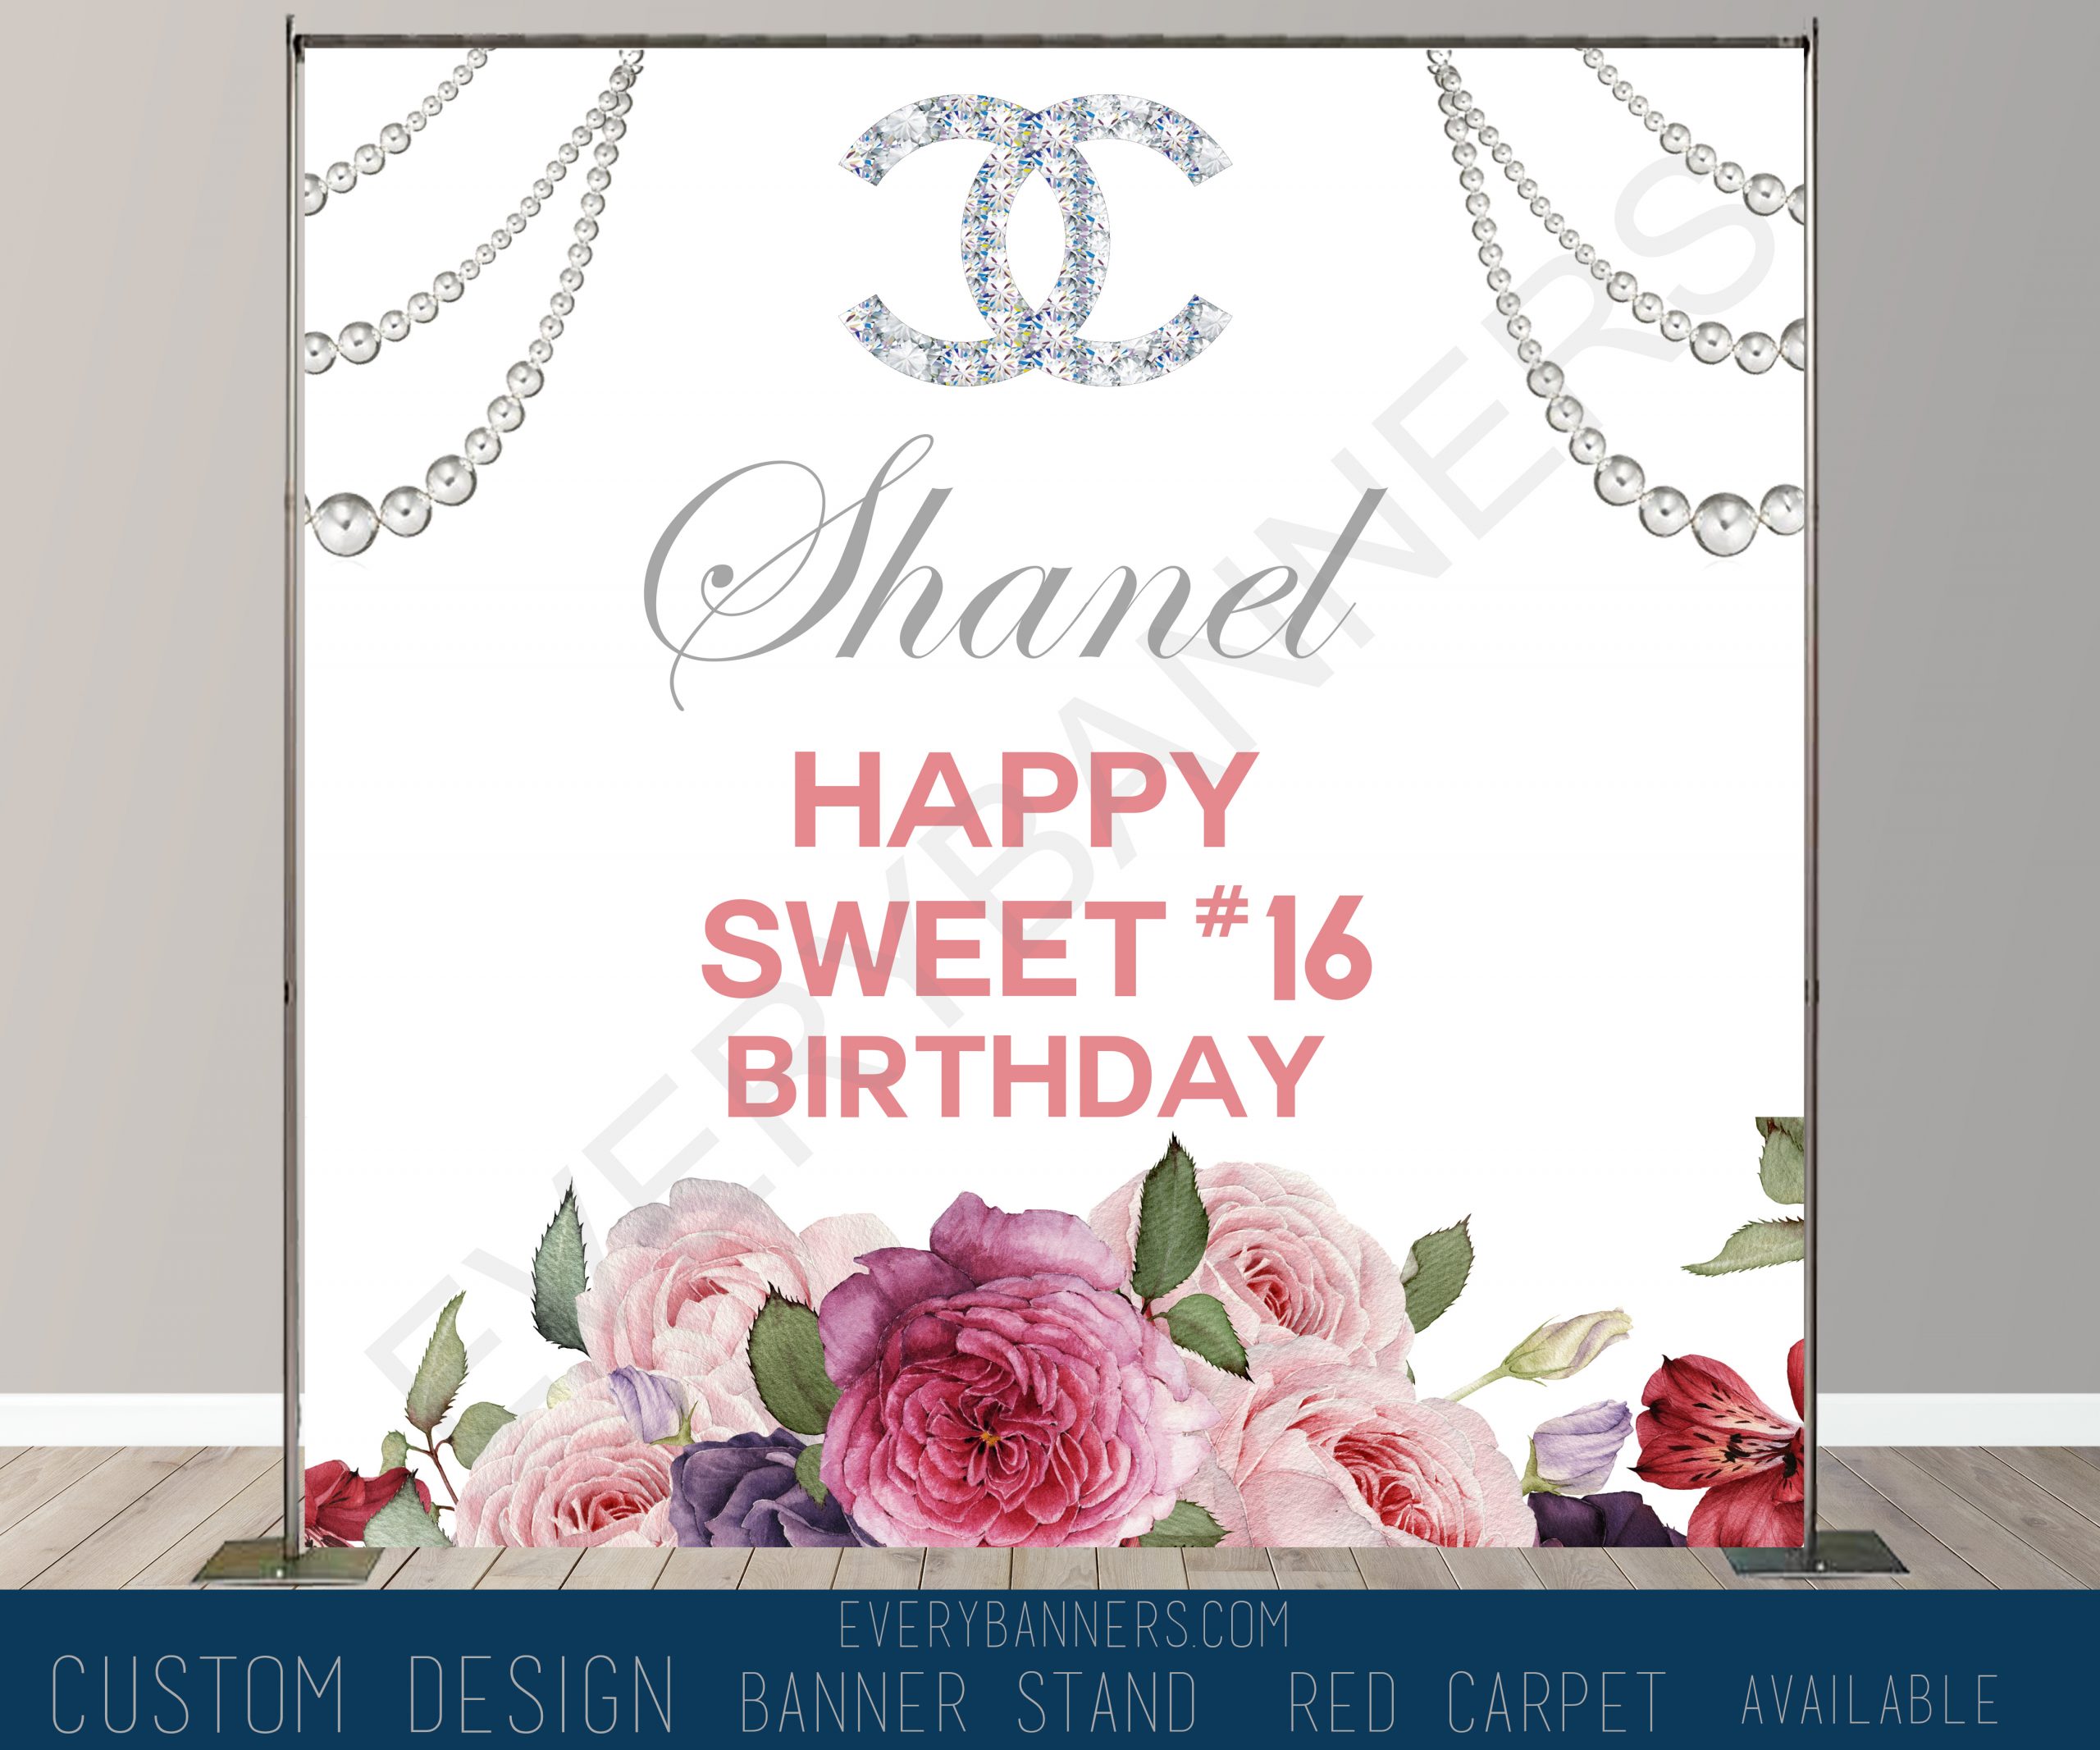 Chanel Sweet 16 Step and Repeat Personalize Backdrop